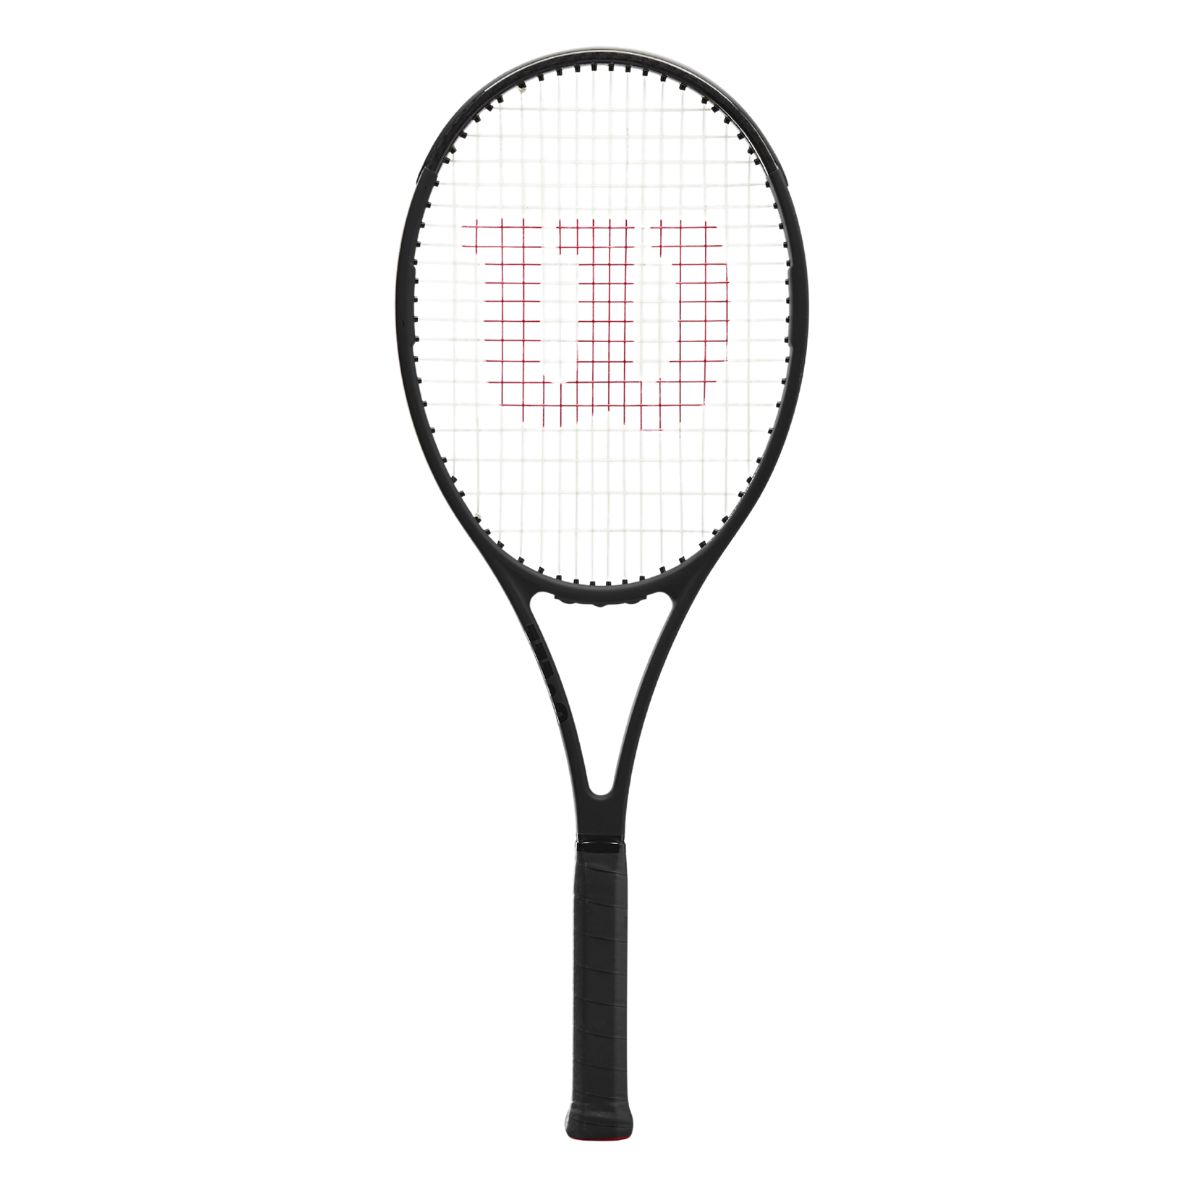 The Best Tennis Rackets for Control Options: Wilson Pro Staff 97 v13